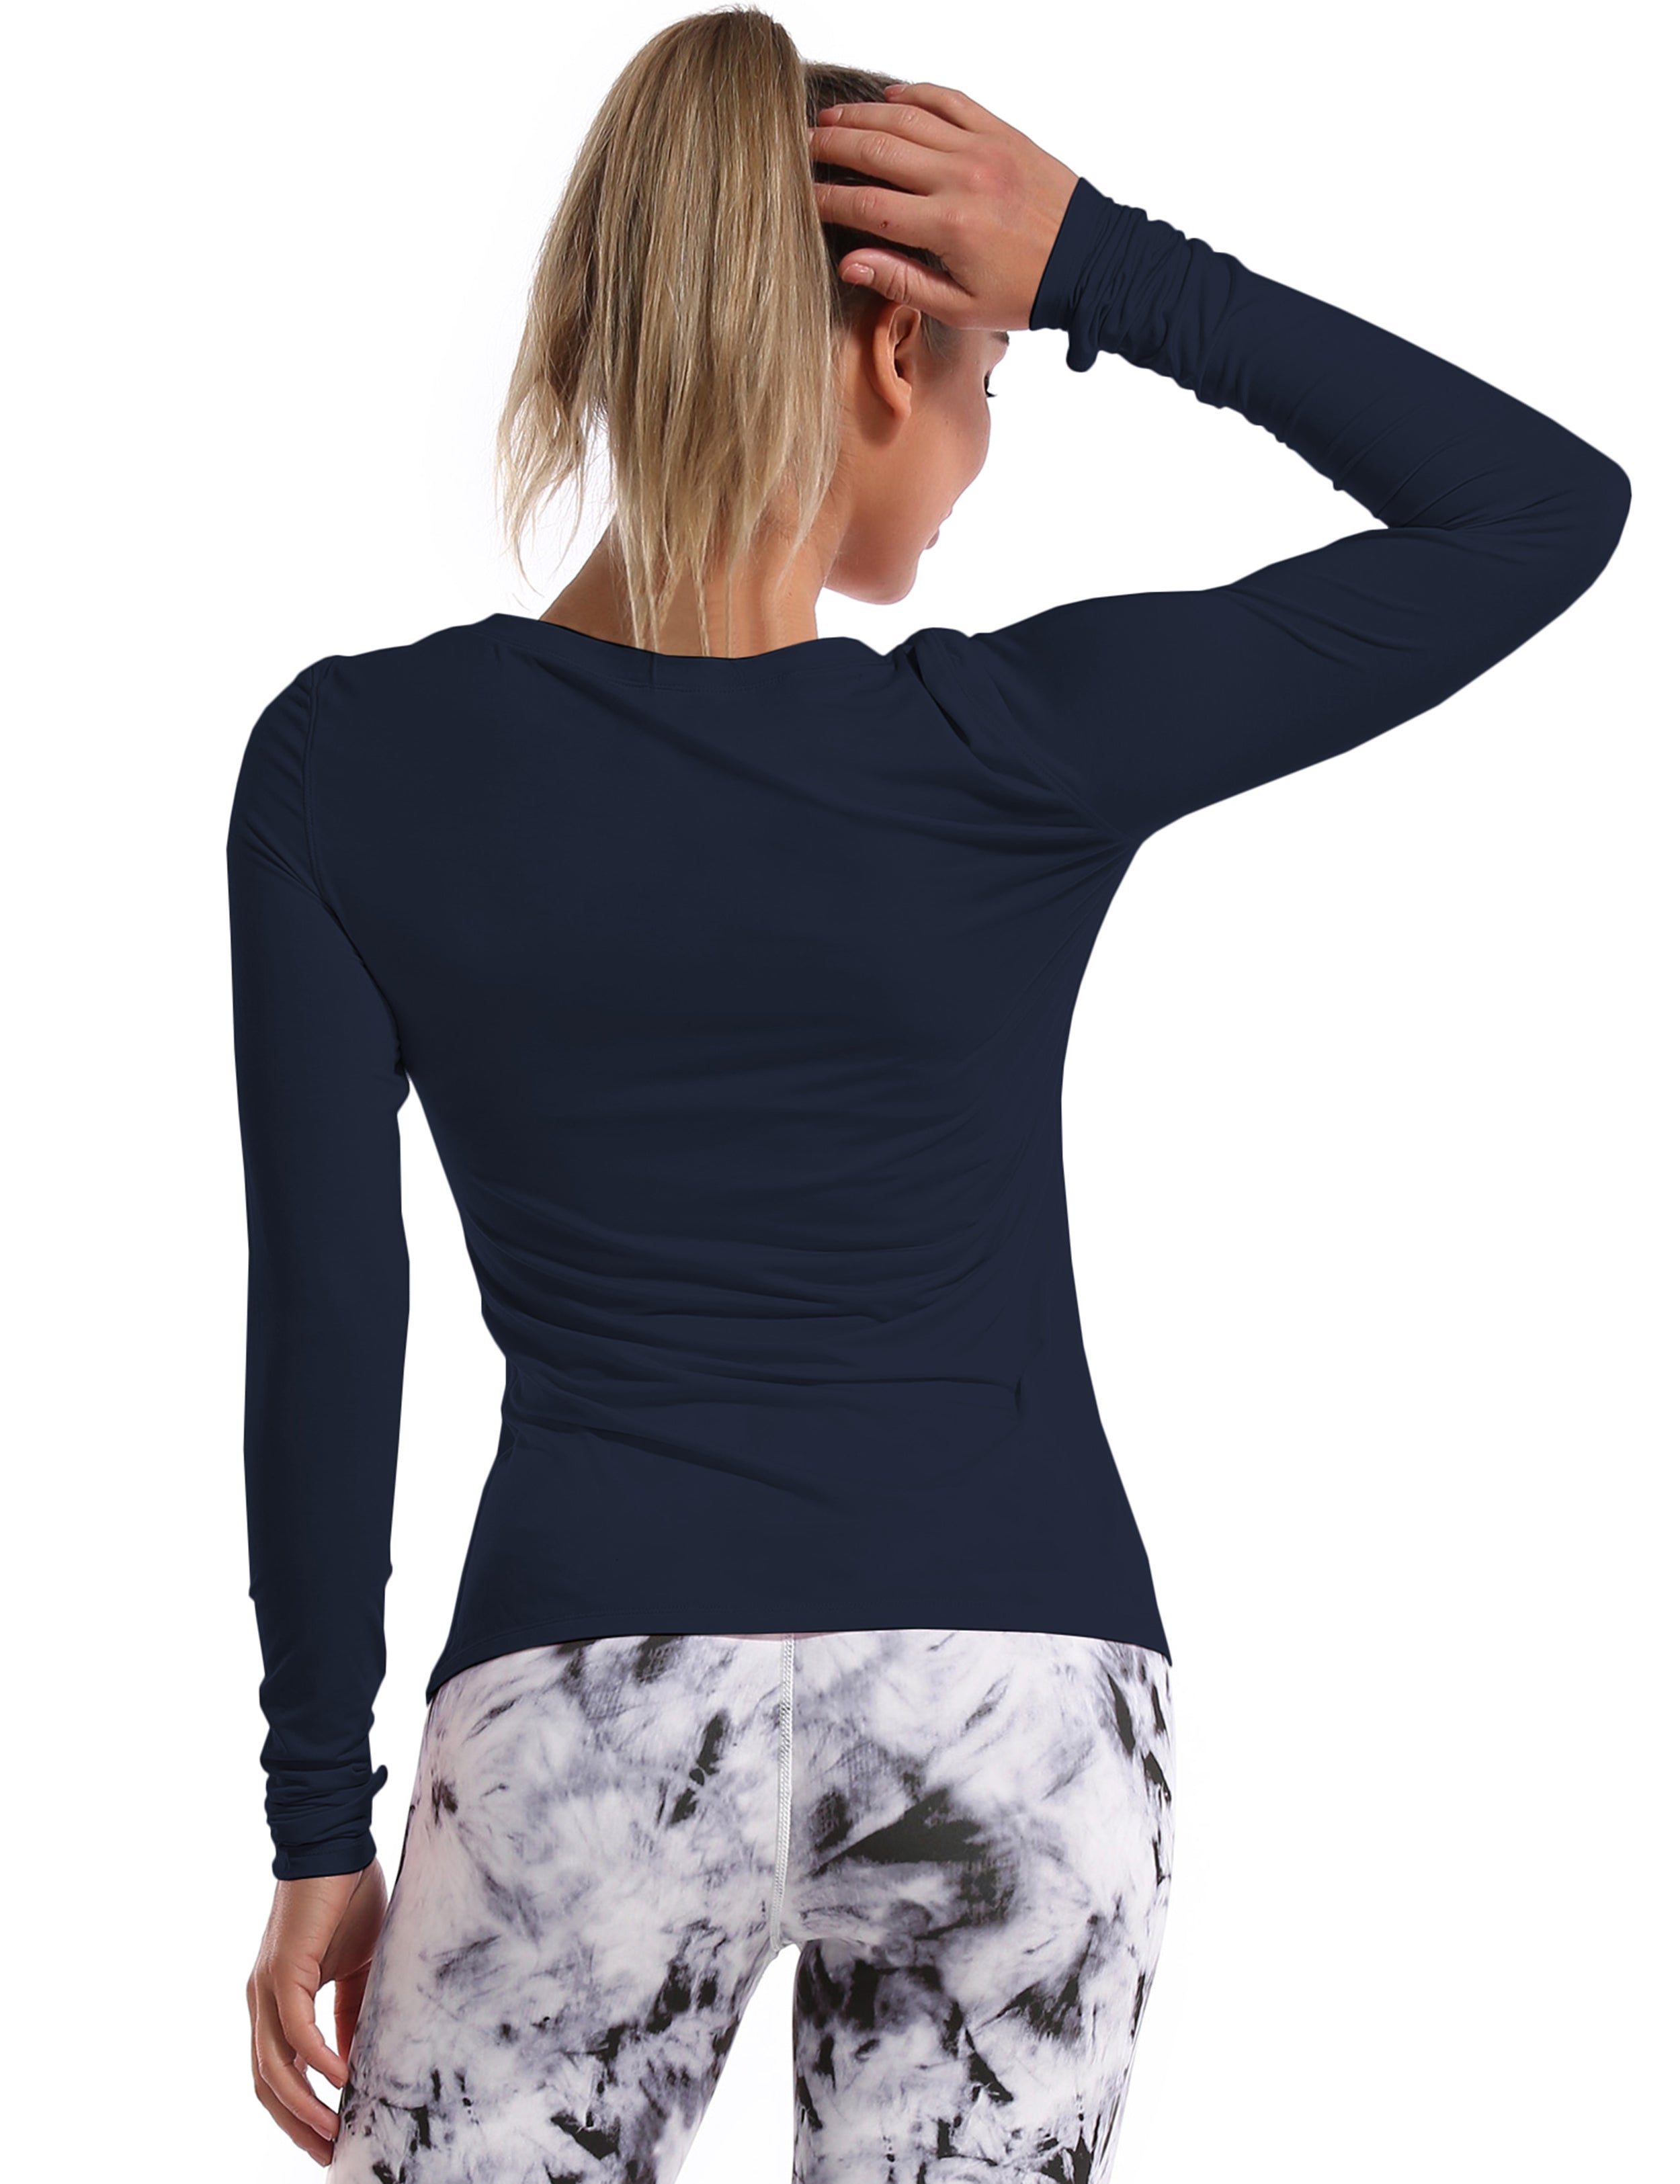 Athlete Long Sleeve Tops darknavy Designed for On the Move Slim fit 93%Modal/7%Spandex Four-way stretch Naturally breathable Super-Soft, Modal Fabric